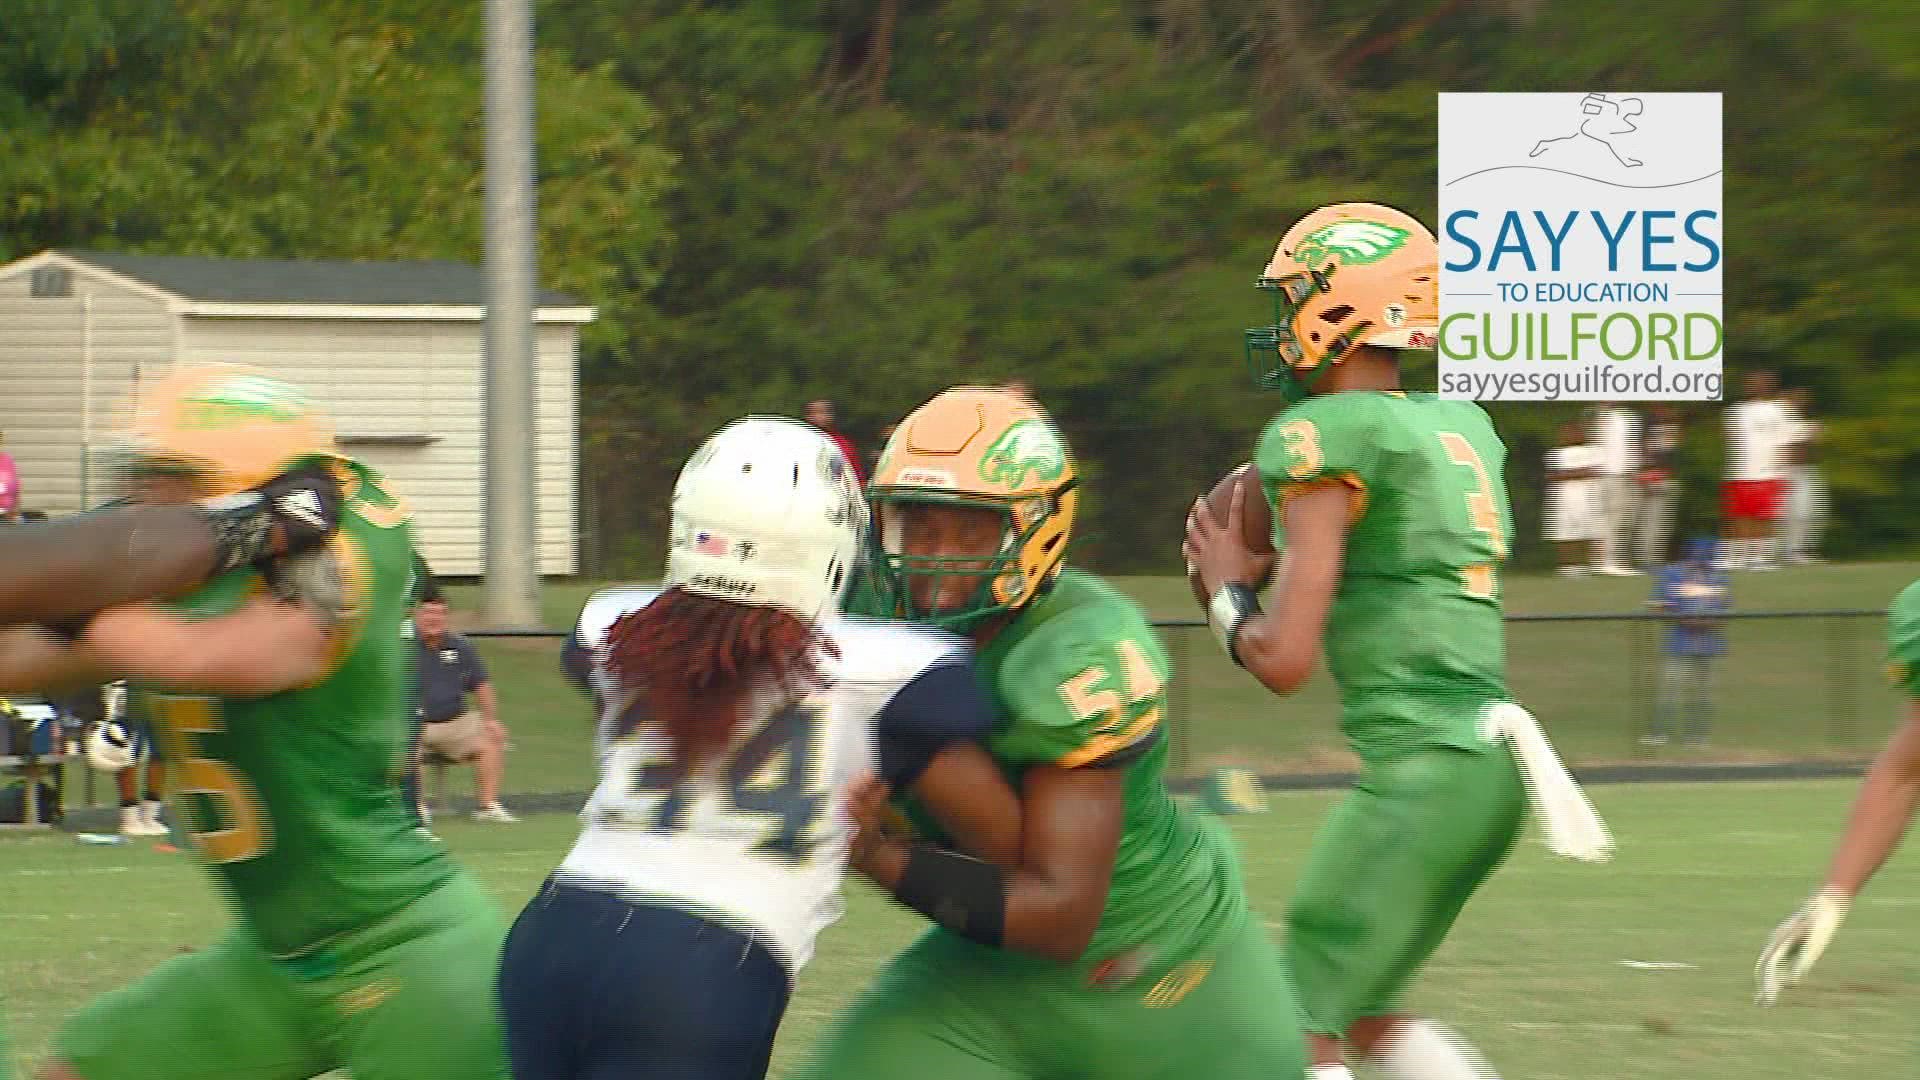 This weeks honor goes to Cummings Safety Zion Crawley with his great INT vs. Eastern Alamance